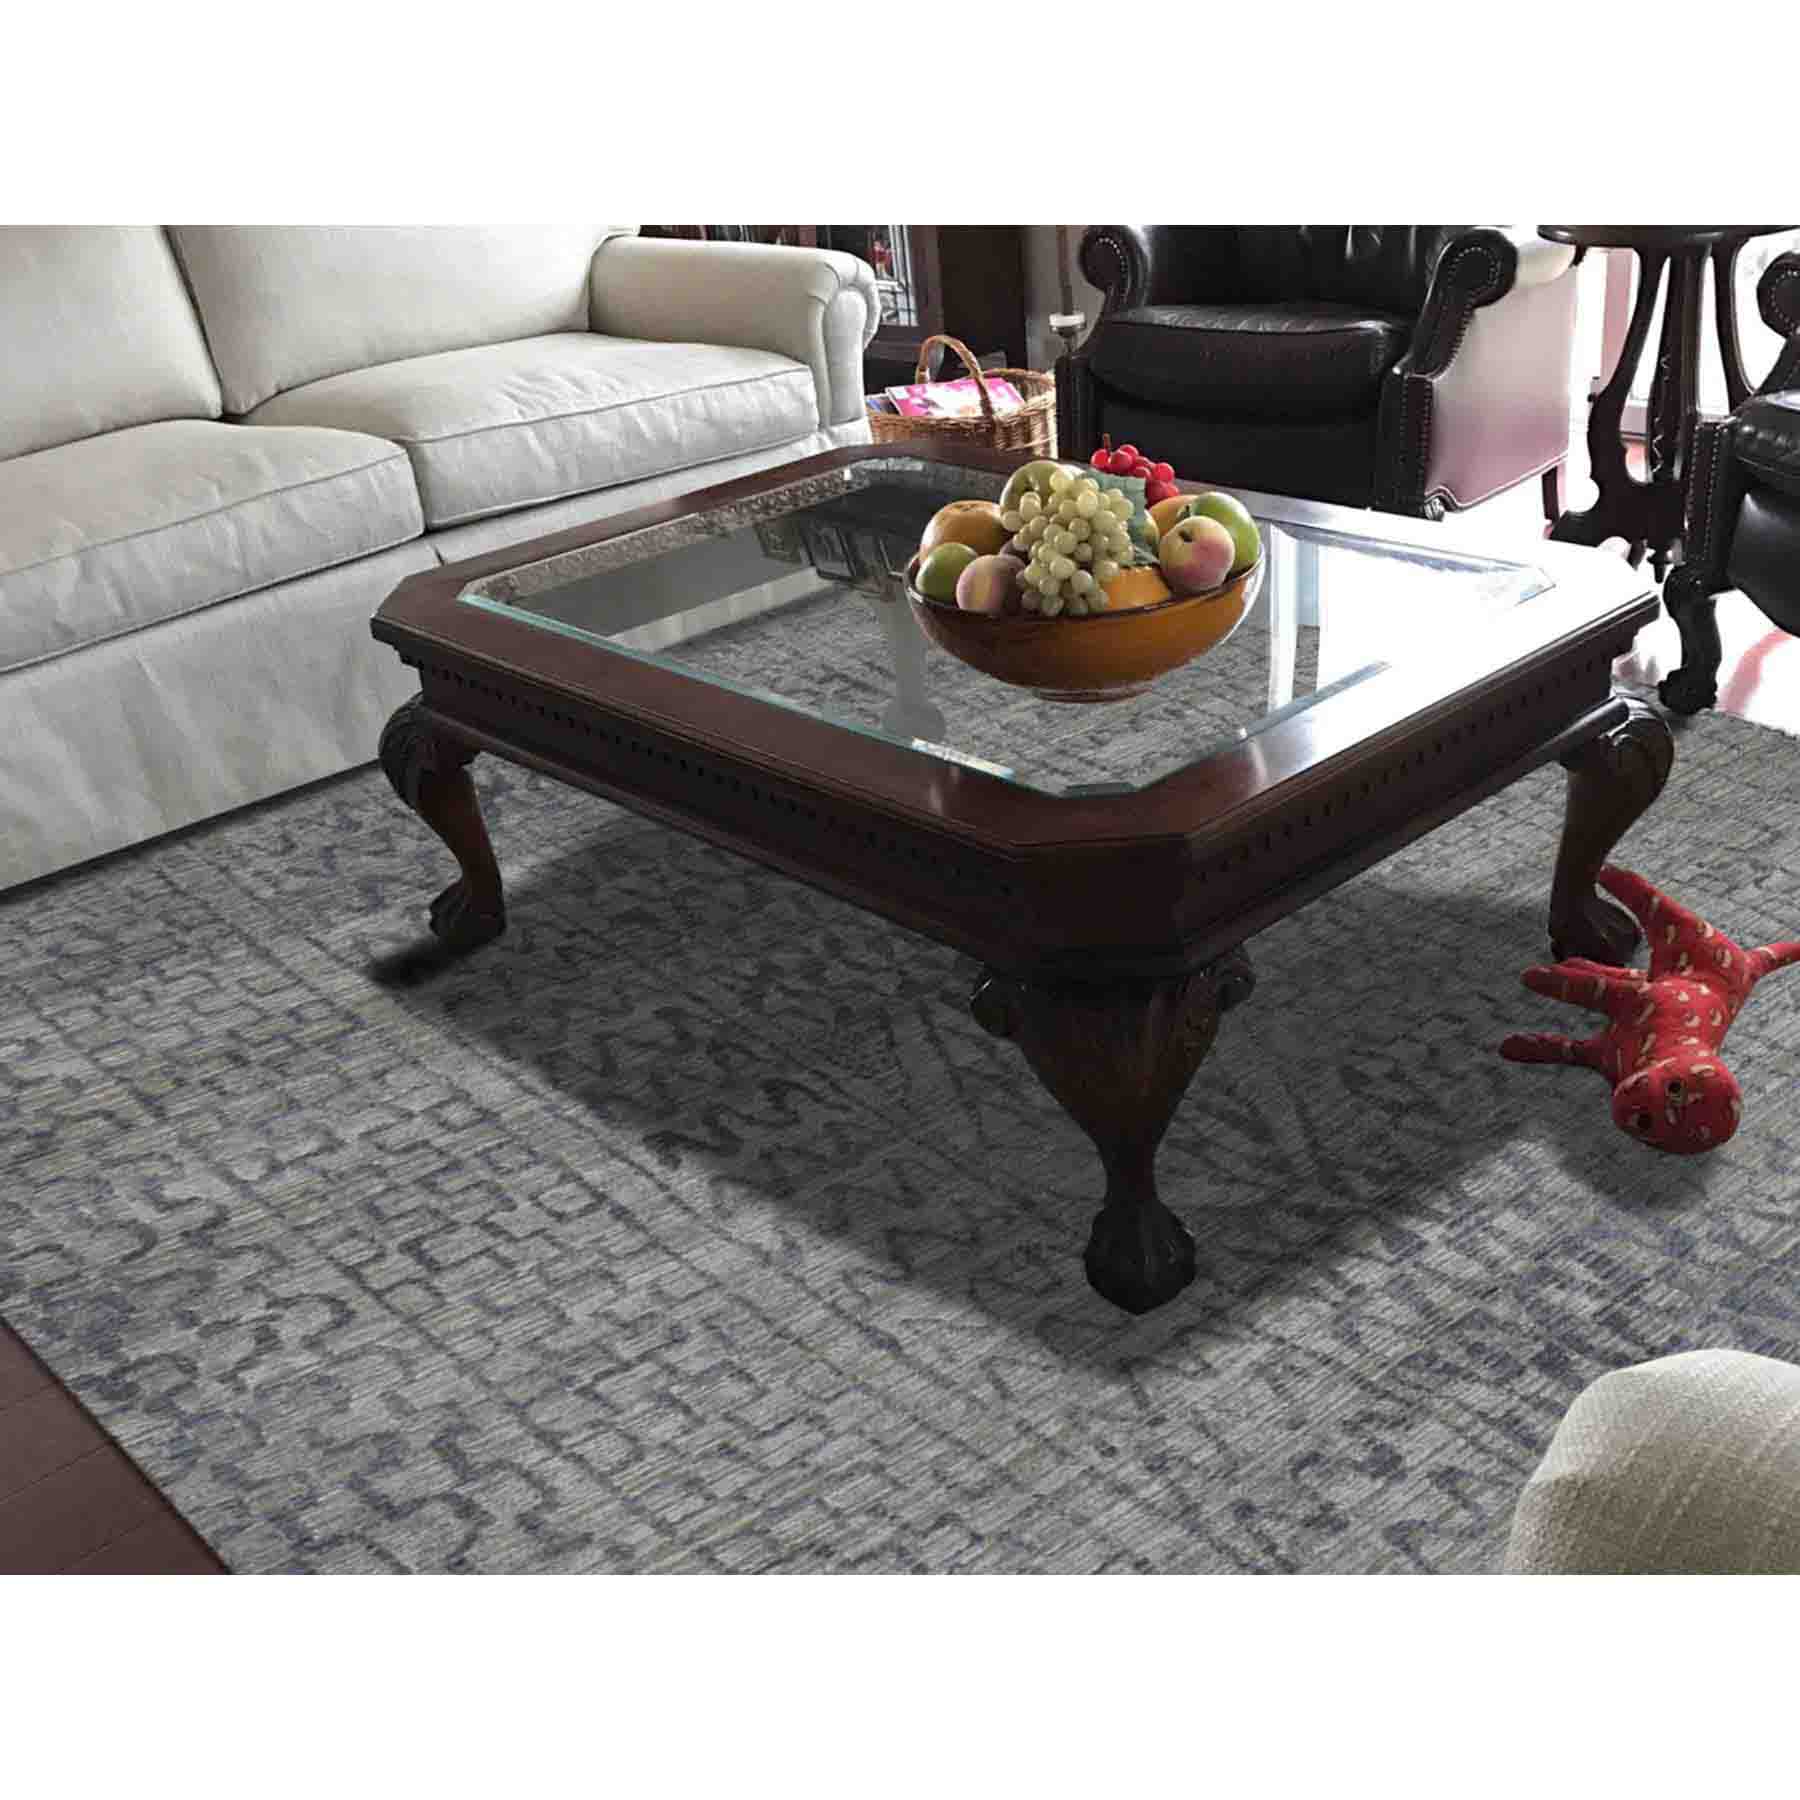 Modern-and-Contemporary-Hand-Knotted-Rug-203055